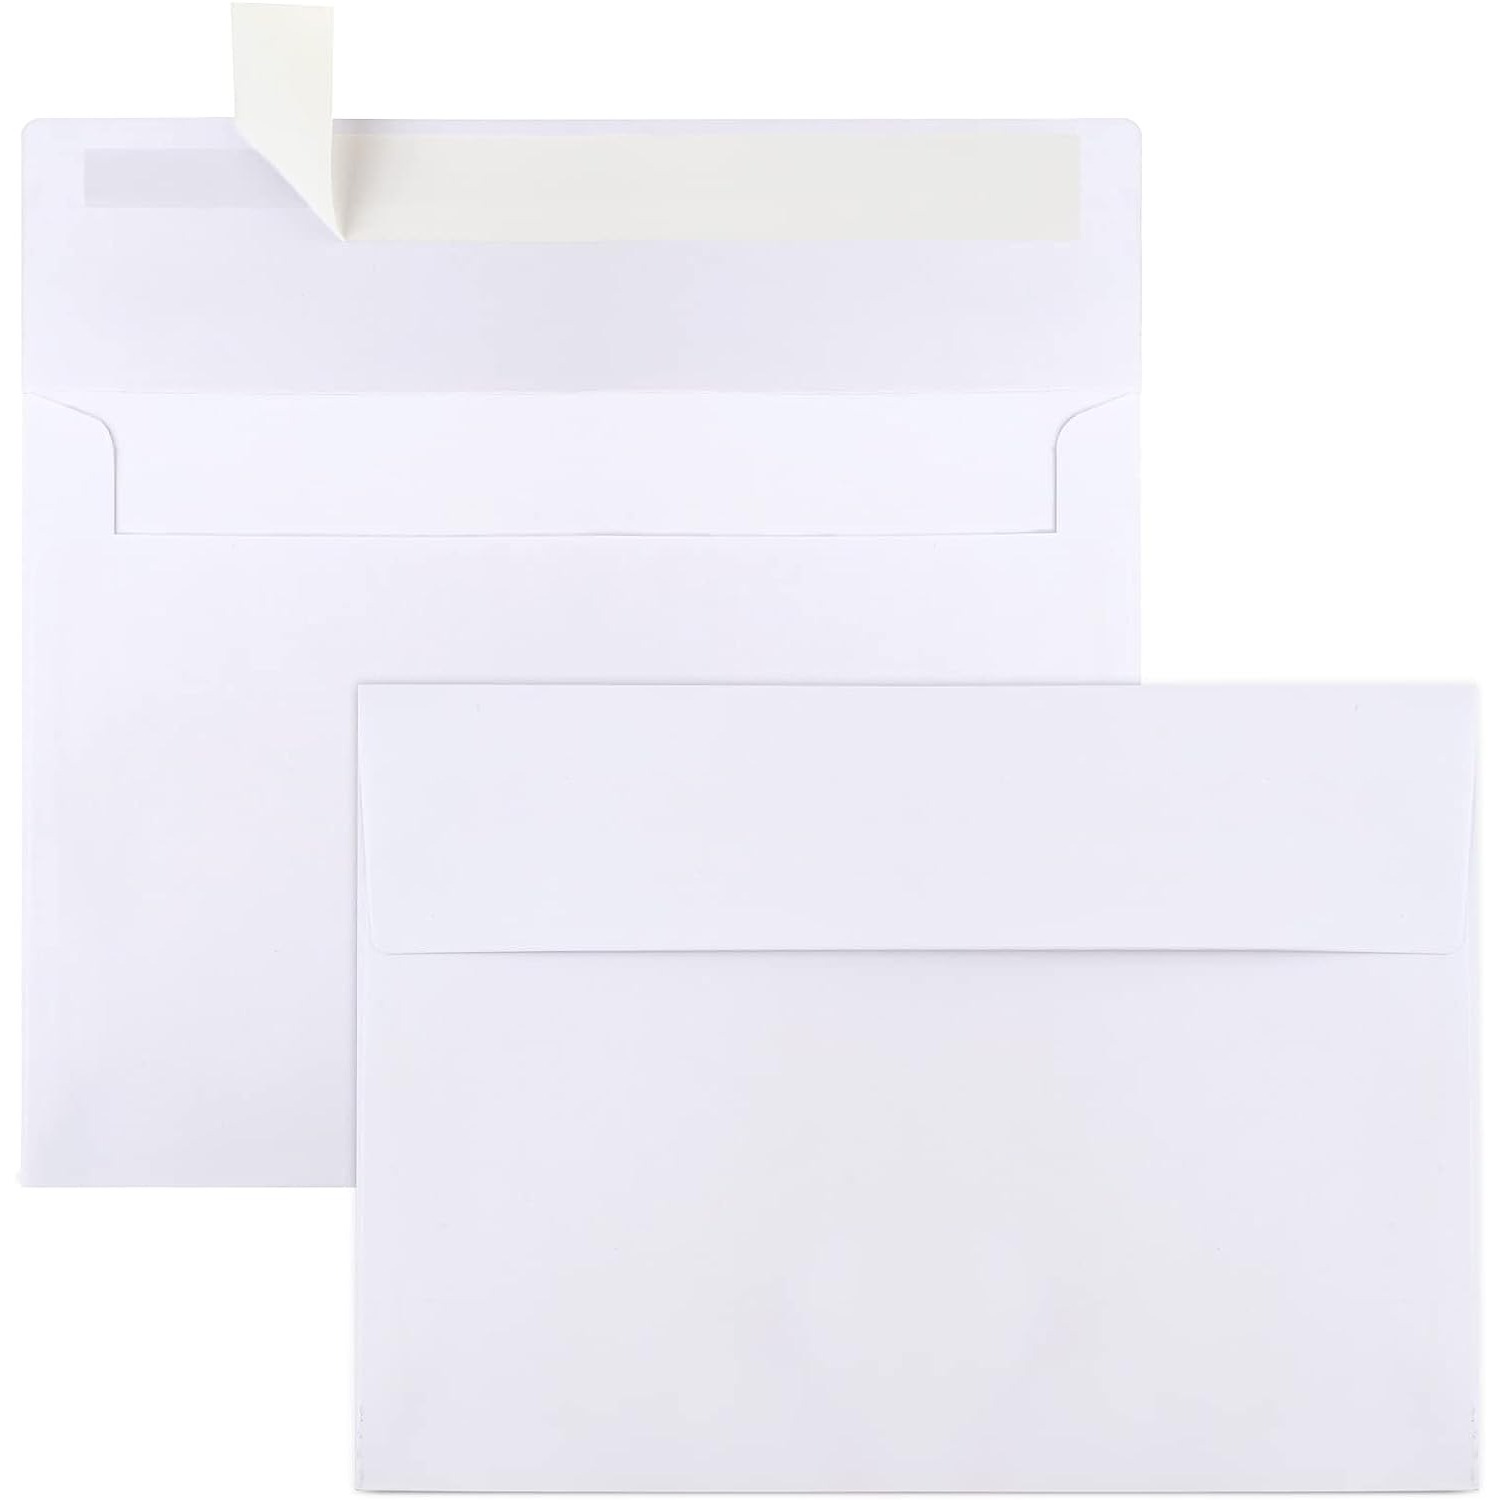 60 Pack Colorful Blank Cards and Envelopes 6x6 inch, Colored Greeting Cards  with White Square Envelopes, 24 Assorted Colors Thank You Cards for